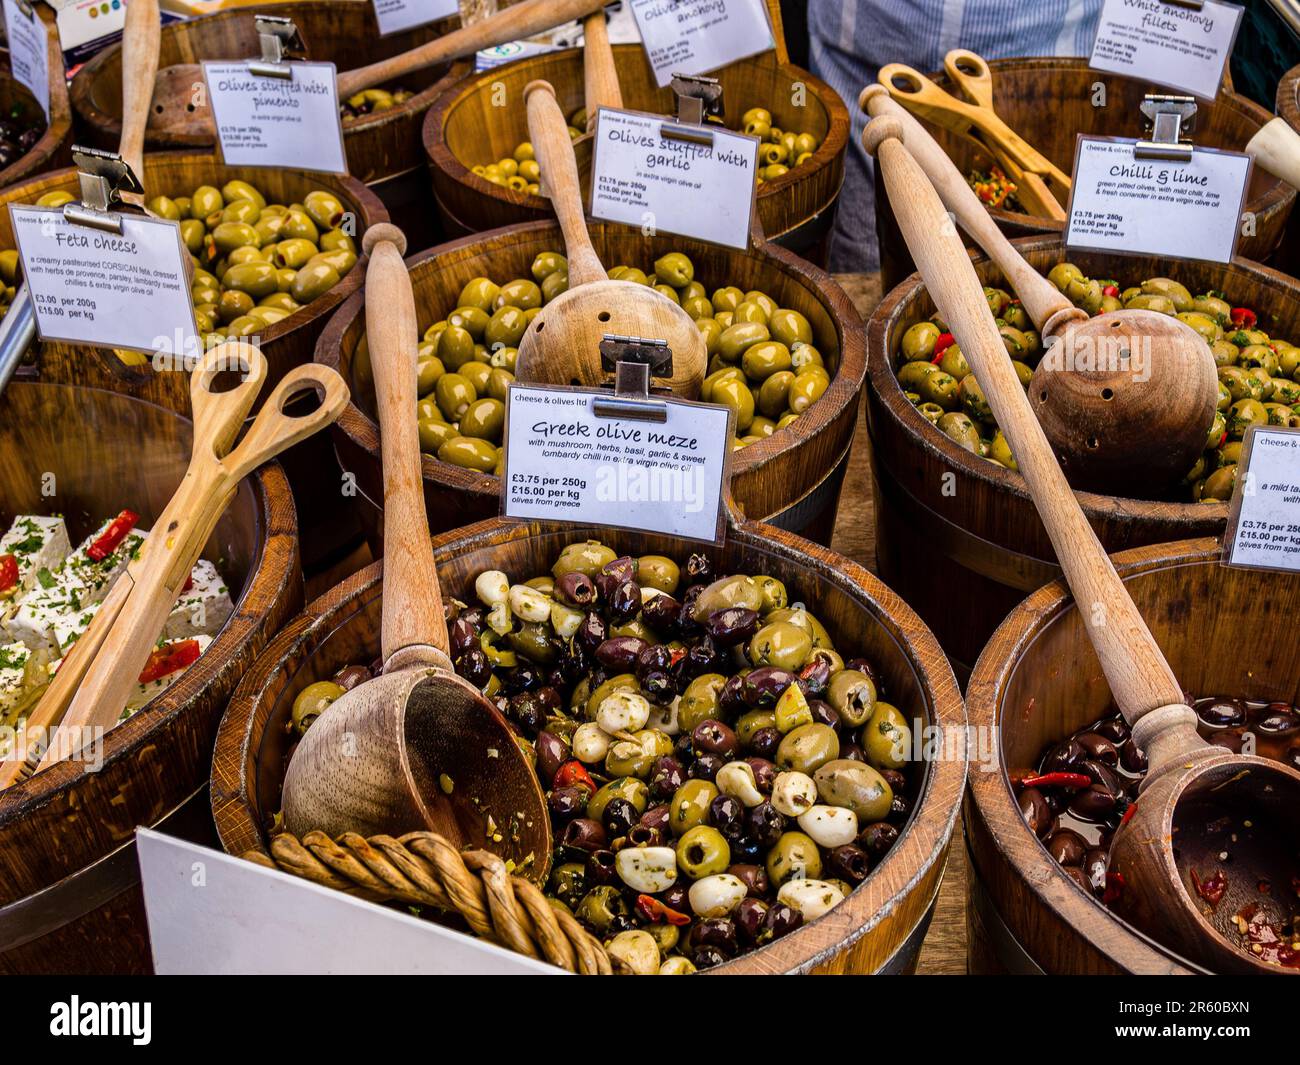 Tubs of organic olives for sale on the market in Salisbury, England. Stock Photo